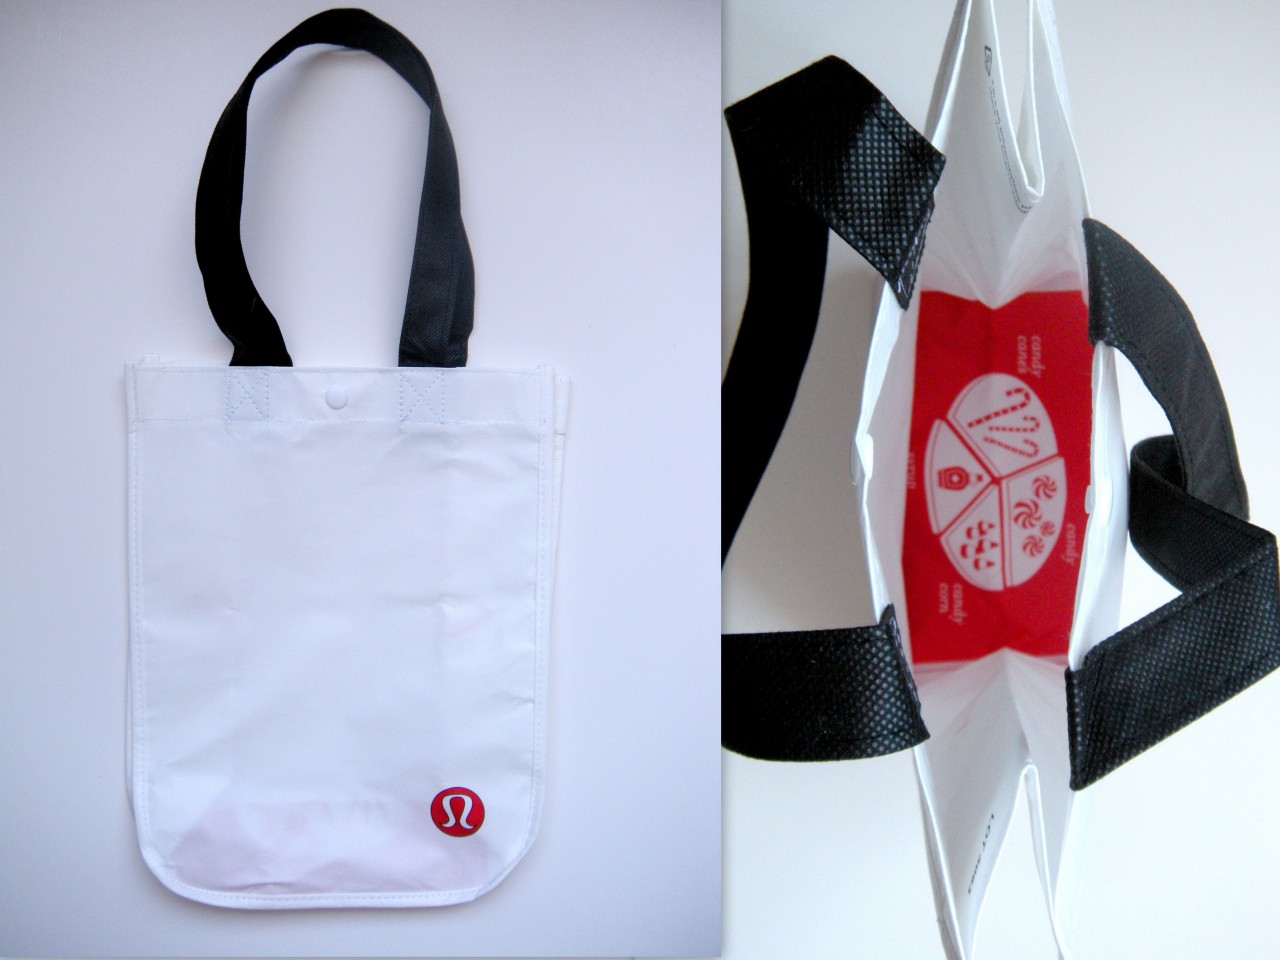 Lululemon Red with Graphic Print Small Reusable Tote Carryall Gym Bag